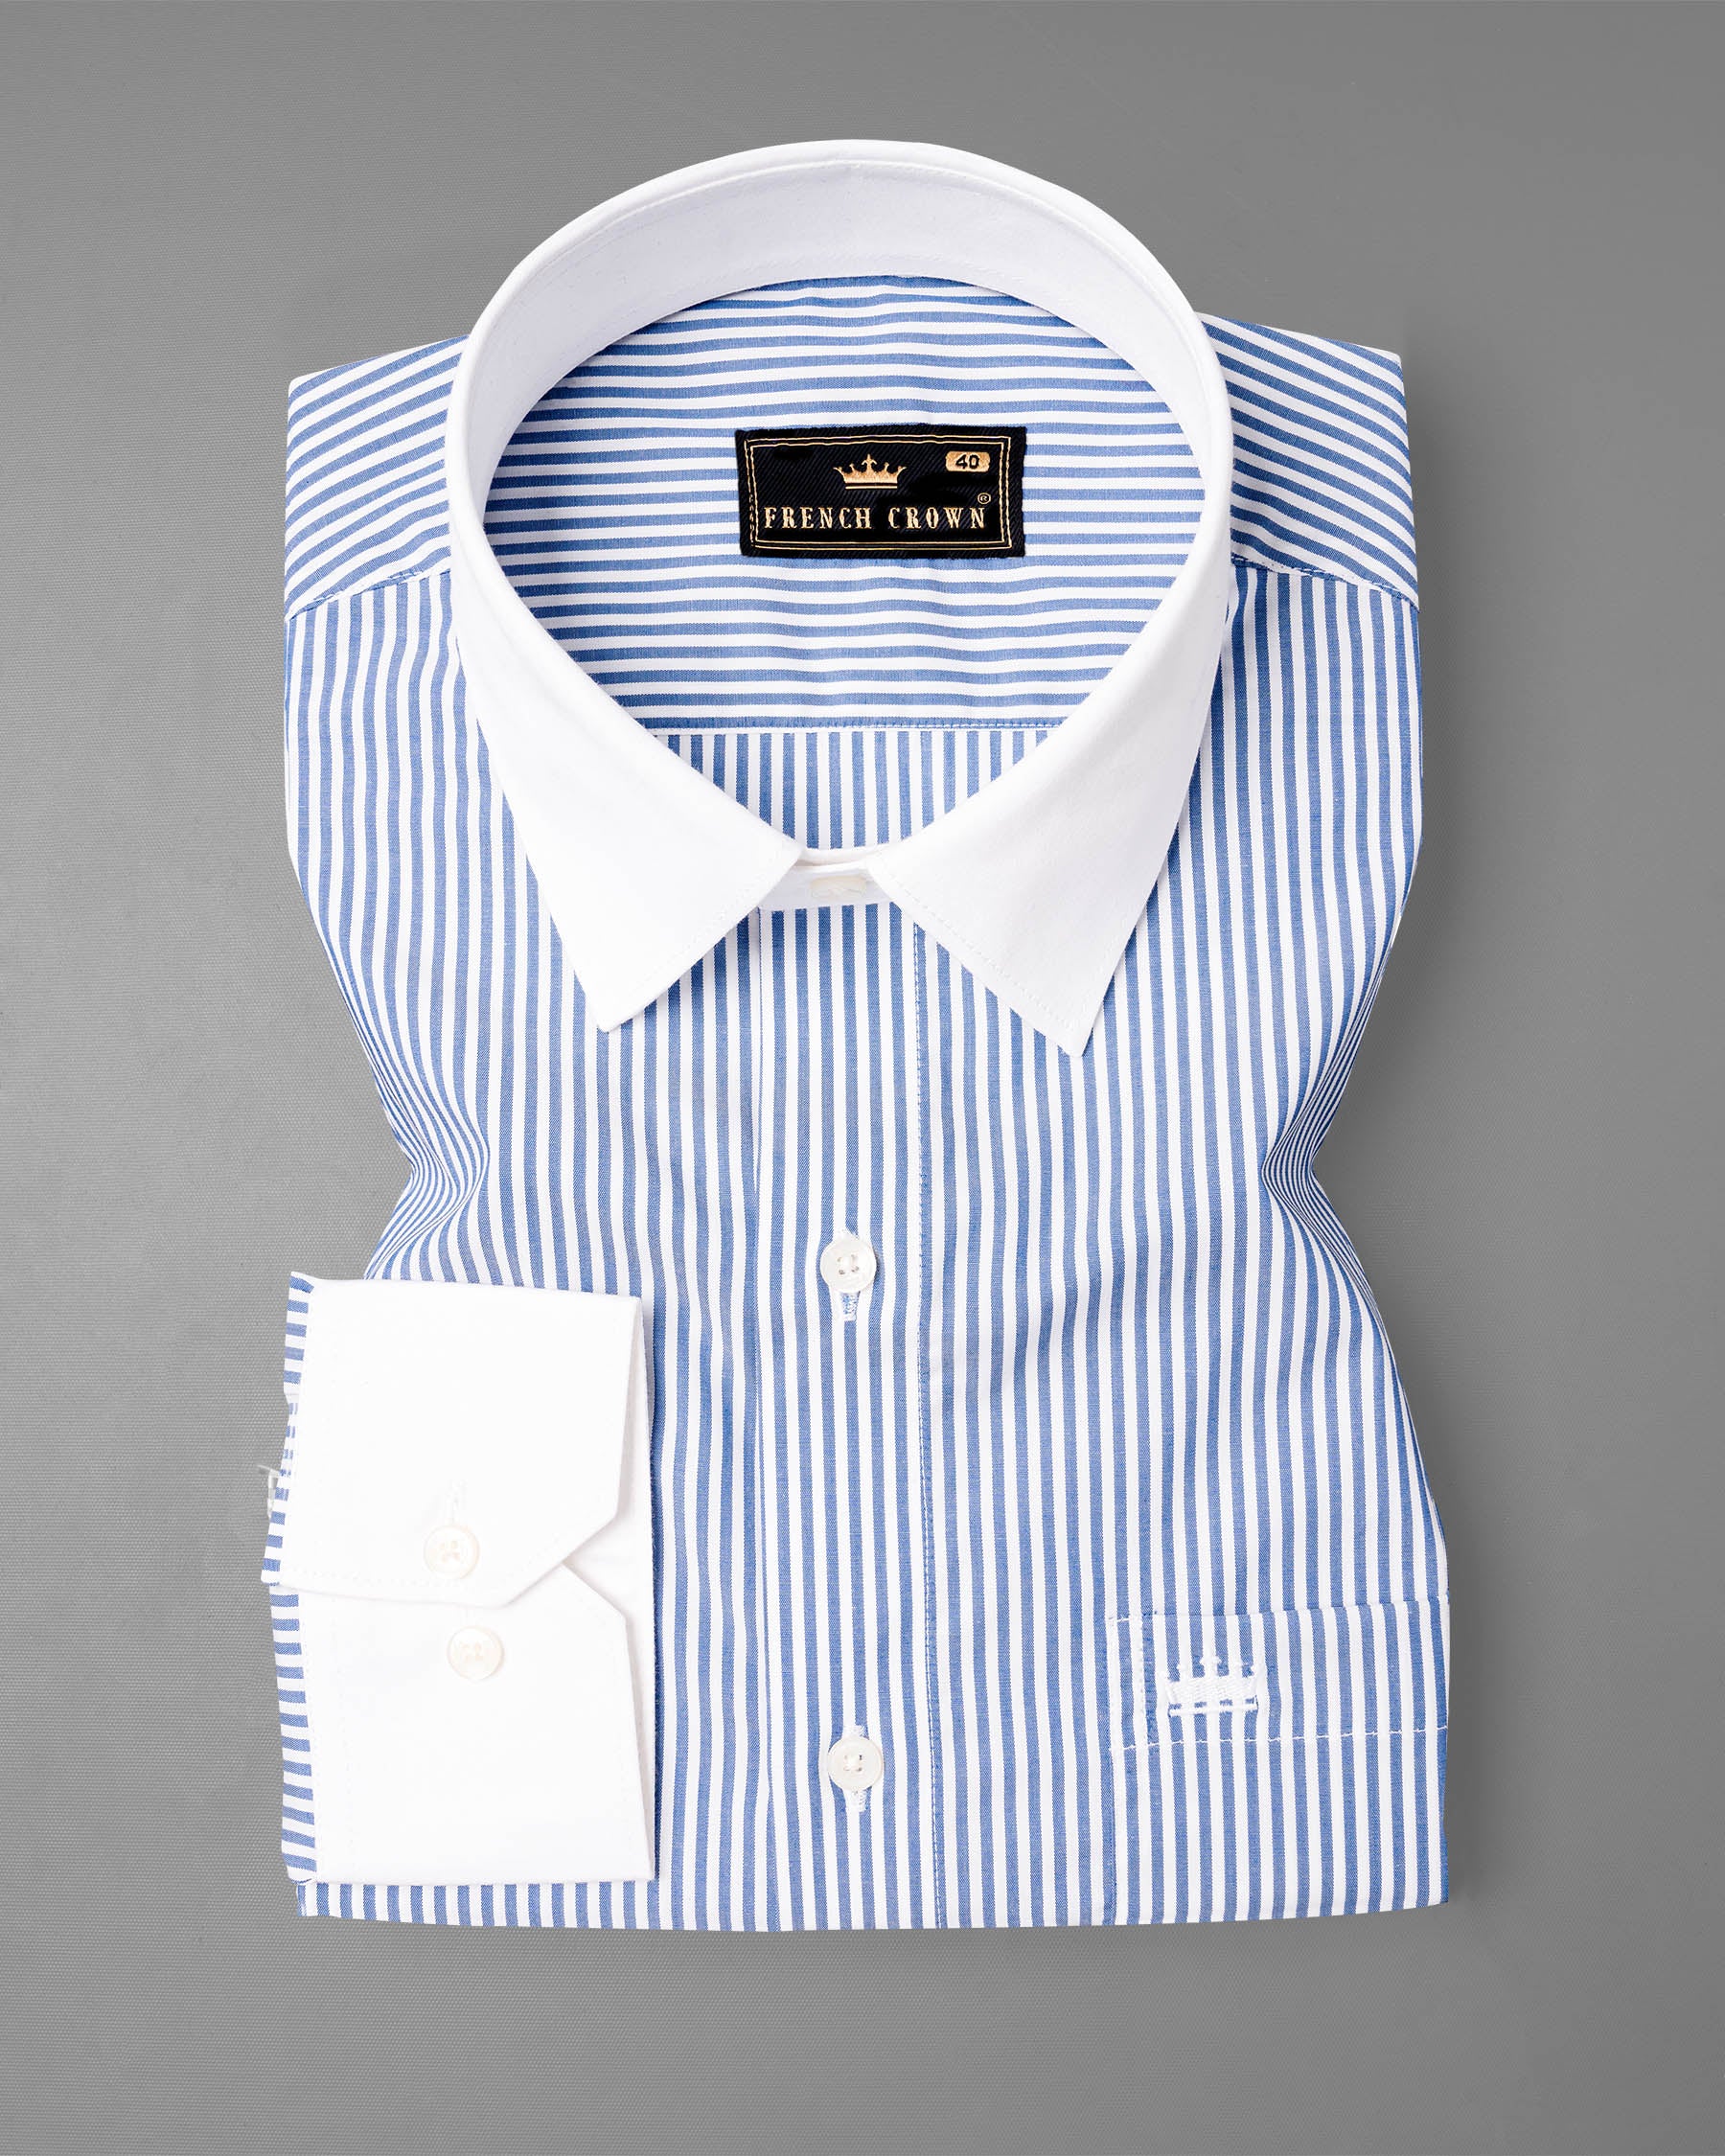 Bright White and Glaucous Blue Striped with White Collar Premium Cotton Shirt 7034-WCC38, 7034-WCCH-38, 7034-WCC39, 7034-WCCH-39, 7034-WCC40, 7034-WCCH-40, 7034-WCC42, 7034-WCCH-42, 7034-WCC44, 7034-WCCH-44, 7034-WCC46, 7034-WCCH-46, 7034-WCC48, 7034-WCCH-48, 7034-WCC50, 7034-WCCH-50, 7034-WCC52, 7034-WCCH-52